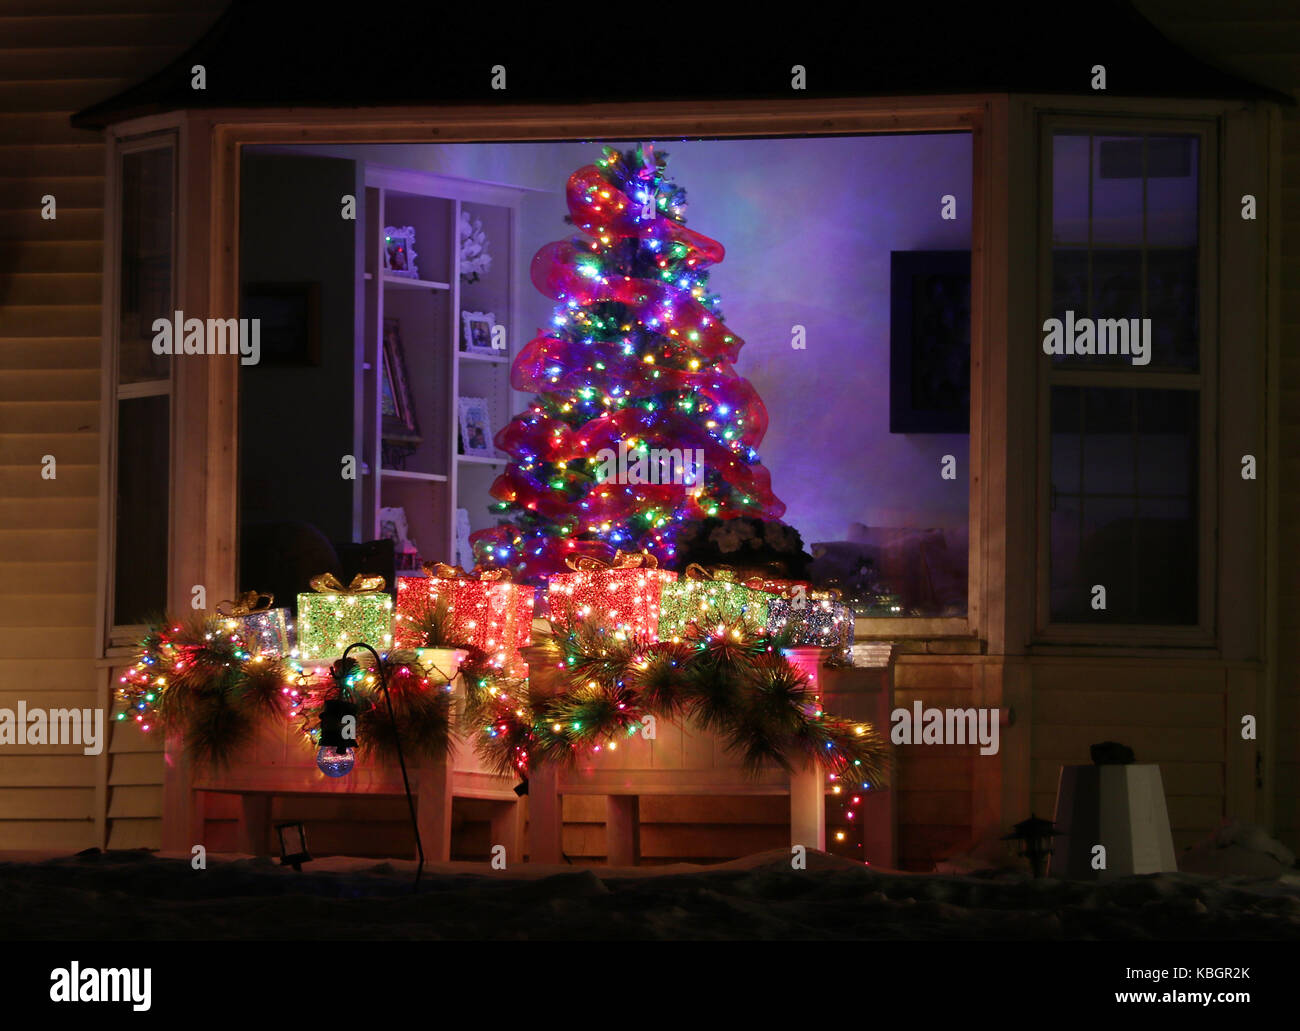 https://c8.alamy.com/comp/KBGR2K/window-with-decorated-glowing-christmas-tree-inside-a-house-and-bright-KBGR2K.jpg